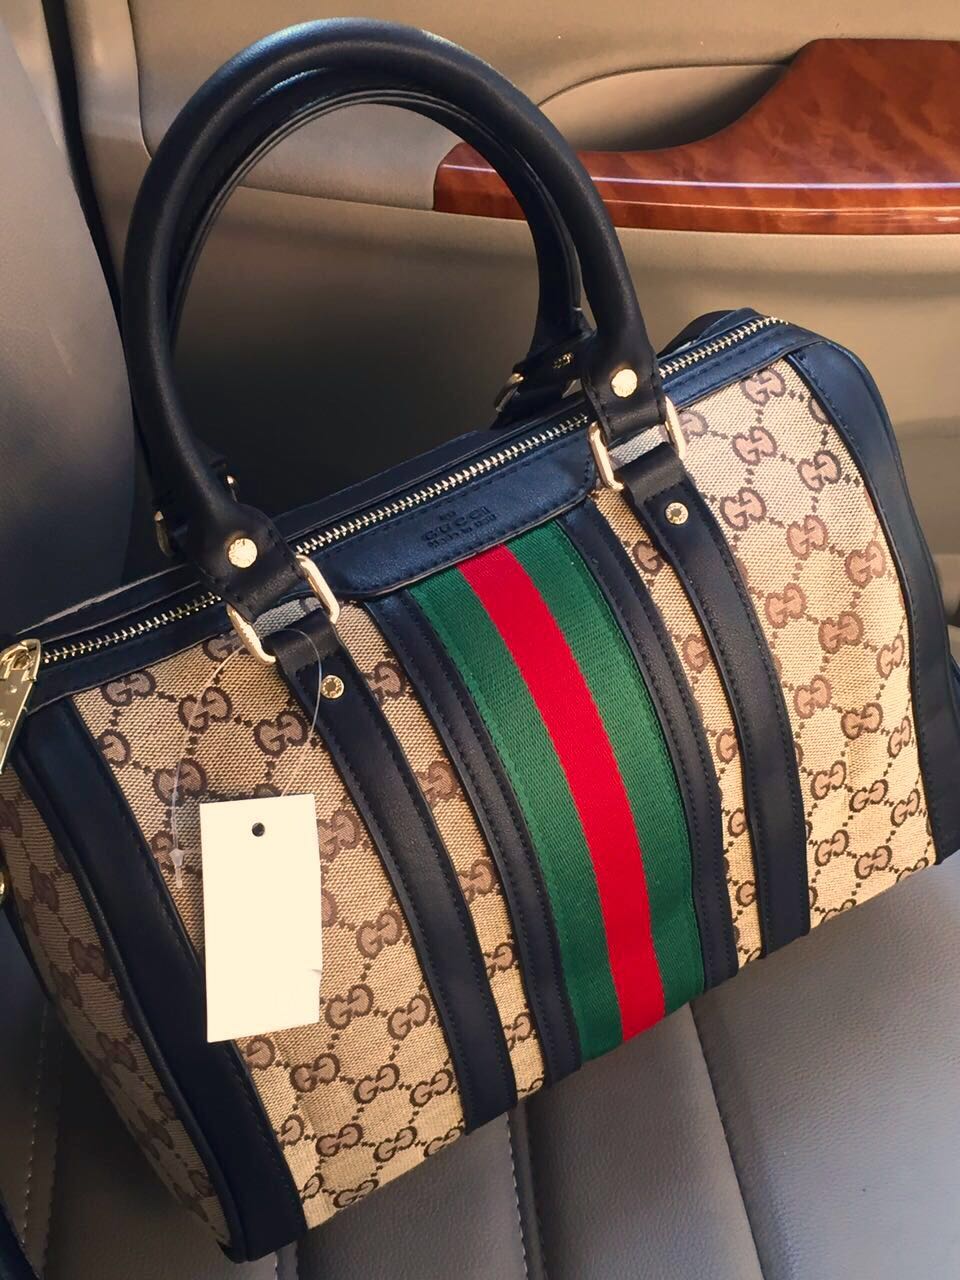 Cheap Gucci Bags For Women - Exclusive Offer - Shop At Dilli Bazar